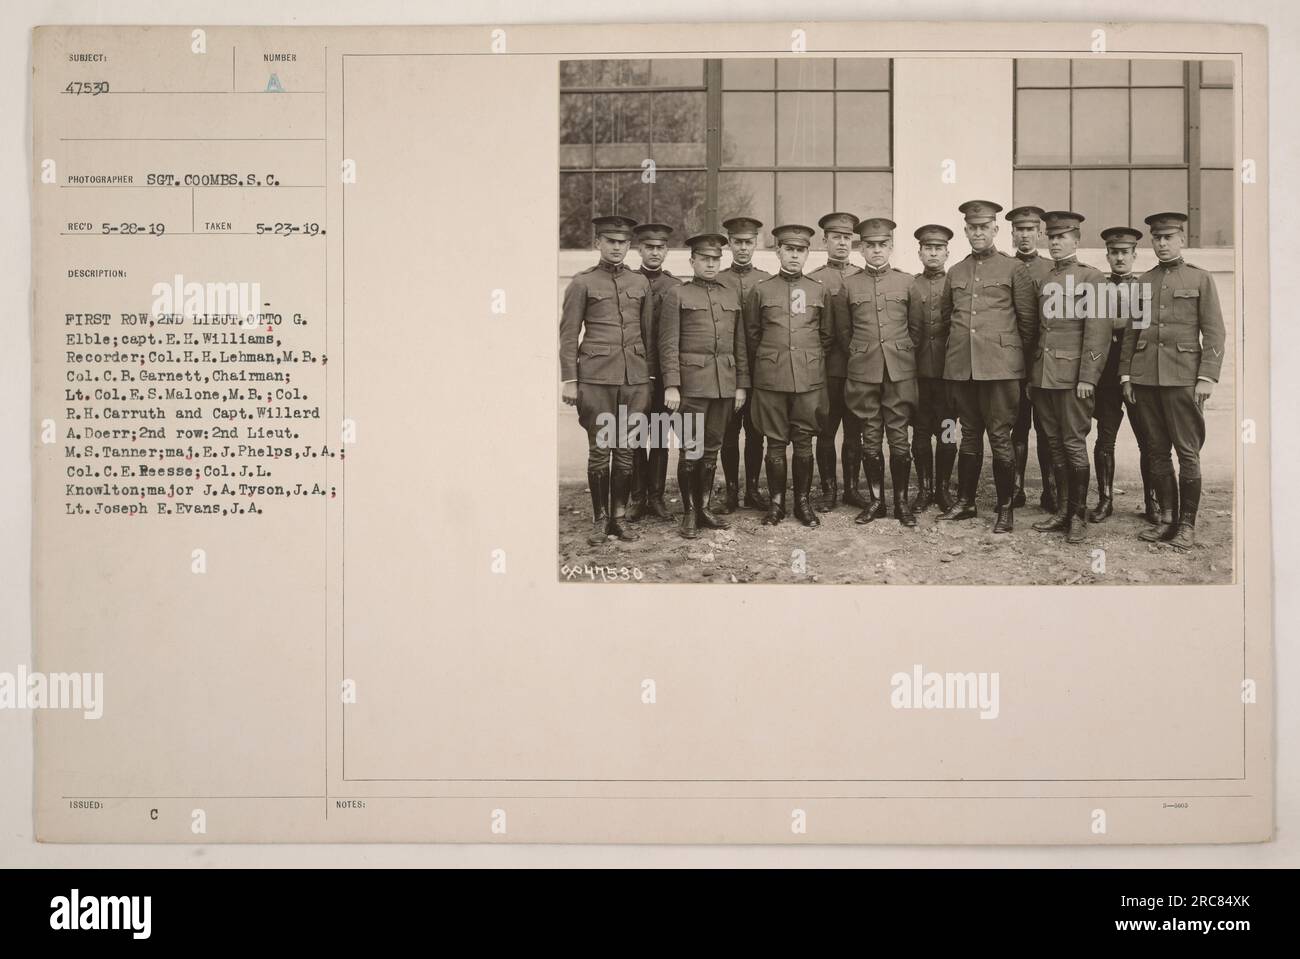 Group photo of the military personnel involved in a meeting. First row consists of 2nd Lieutenant Otto G. Elble, Captain E.H. Williams (Recorder), Colonel H.H. Lehman (M.B.), Colonel C.B. Garnett (Chairman), Lieutenant Colonel E.S. Malone (M.B.), Colonel R.H. Carruth, and Captain Willard A. Doerr. Second row includes 2nd Lieutenant M.S. Tanner, Major E.J. Phelps, Colonel C.E. Reesse, Colonel J.L. Knowlton, Major J.A. Tyson, and Lieutenant Joseph E. Evans. The photograph was taken on May 23, 1919, and was numbered 47530 in the collection. Stock Photo